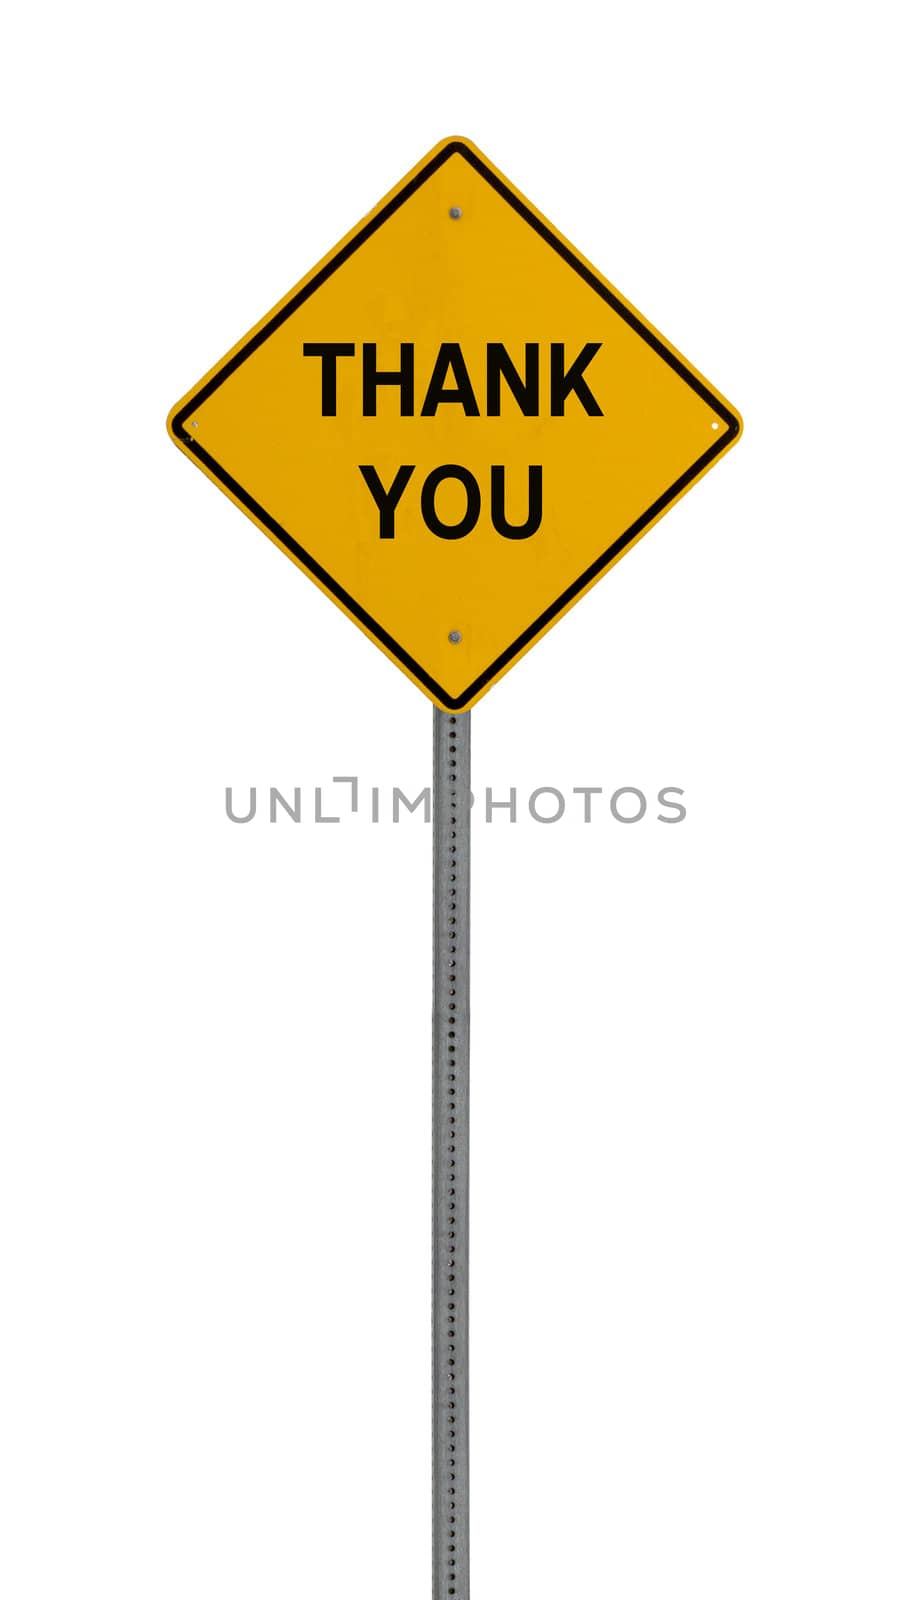 thank you - Yellow road warning sign by jeremywhat